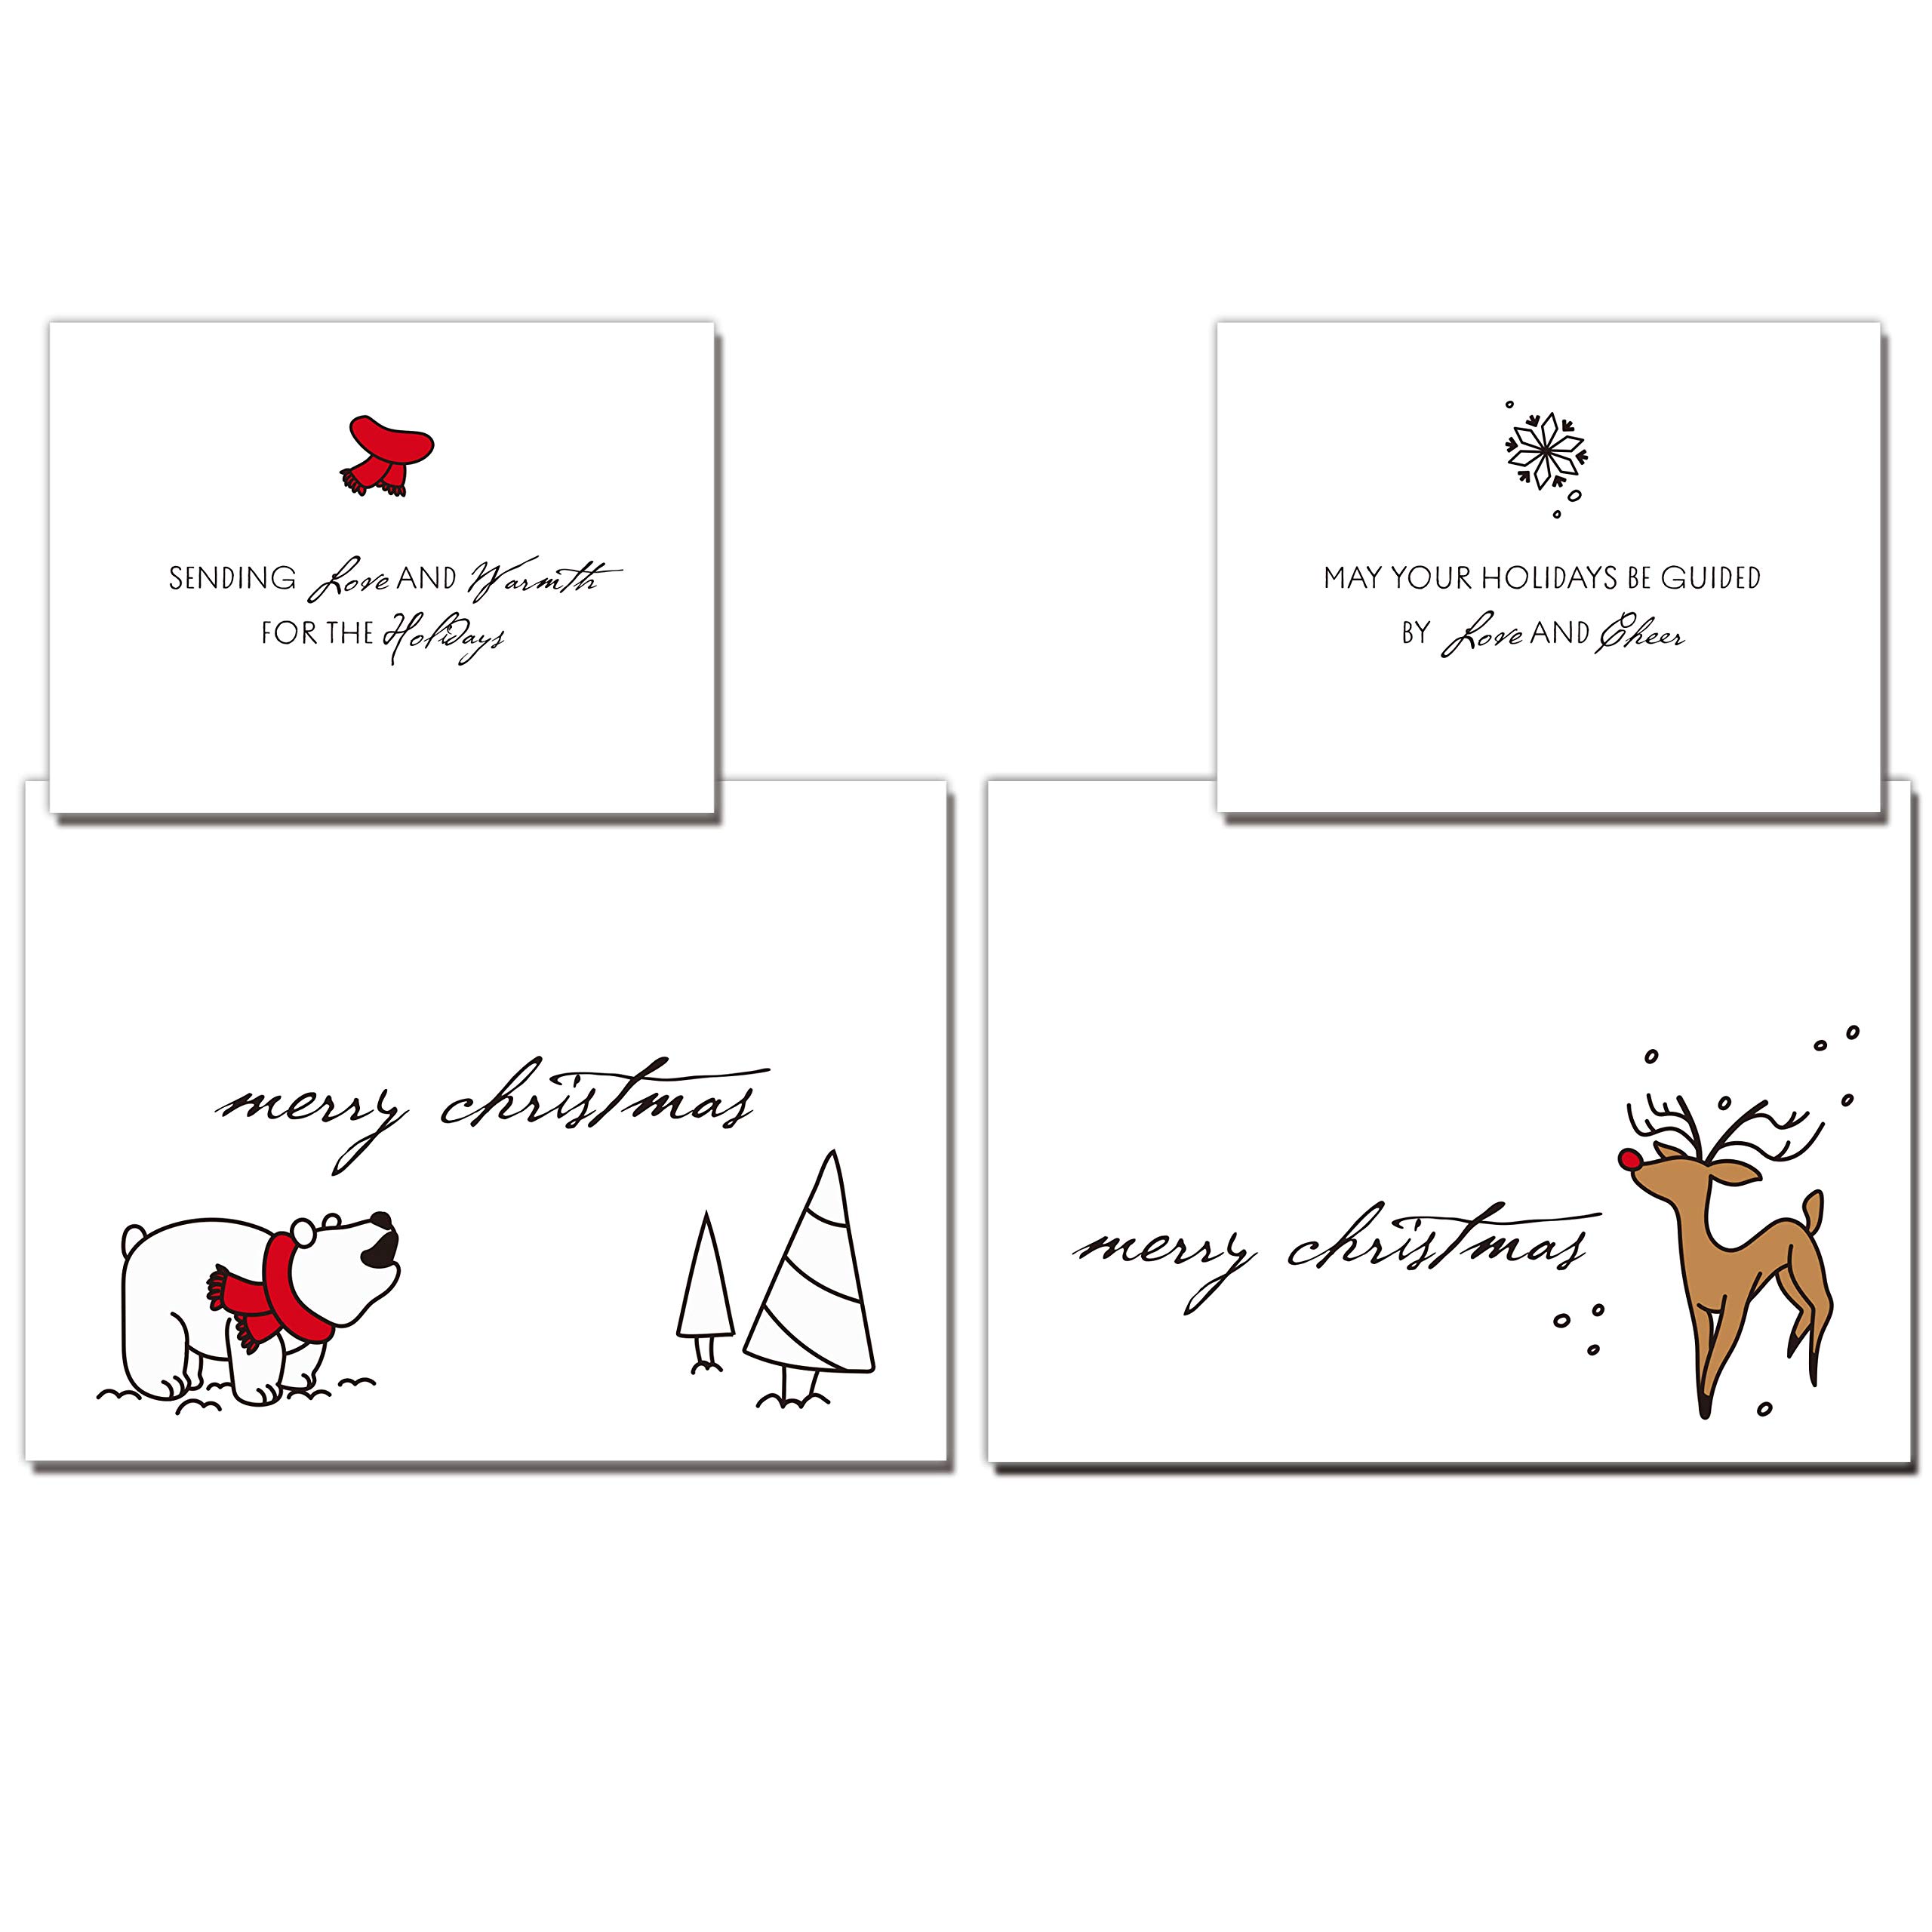 72 Piece Holiday Christmas Greeting Cards with 8 Artistic Greeting Designs & Envelopes 6.25” x 4.6